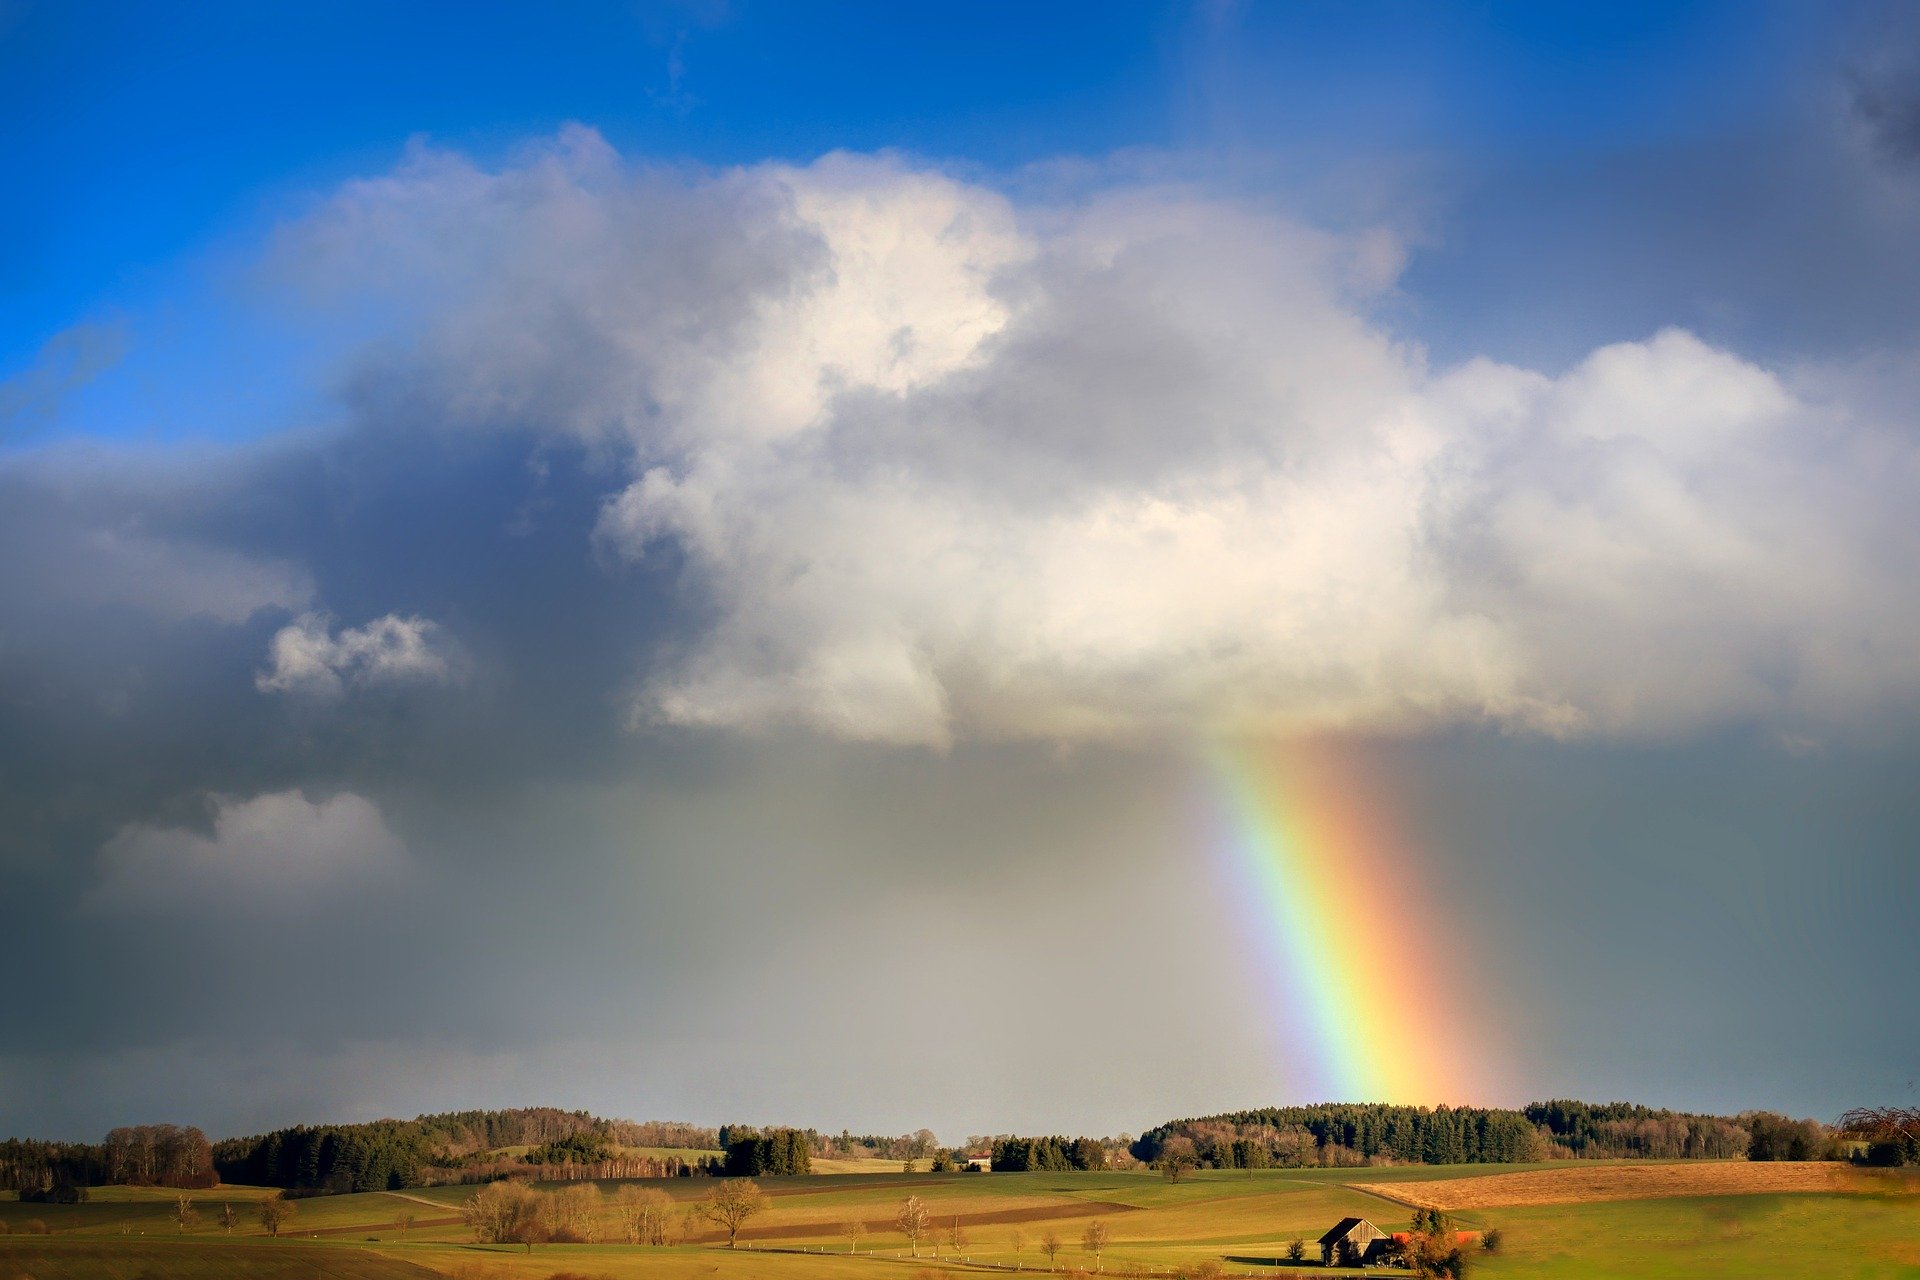 Rainbow appearing out of a cloud over a countryside.